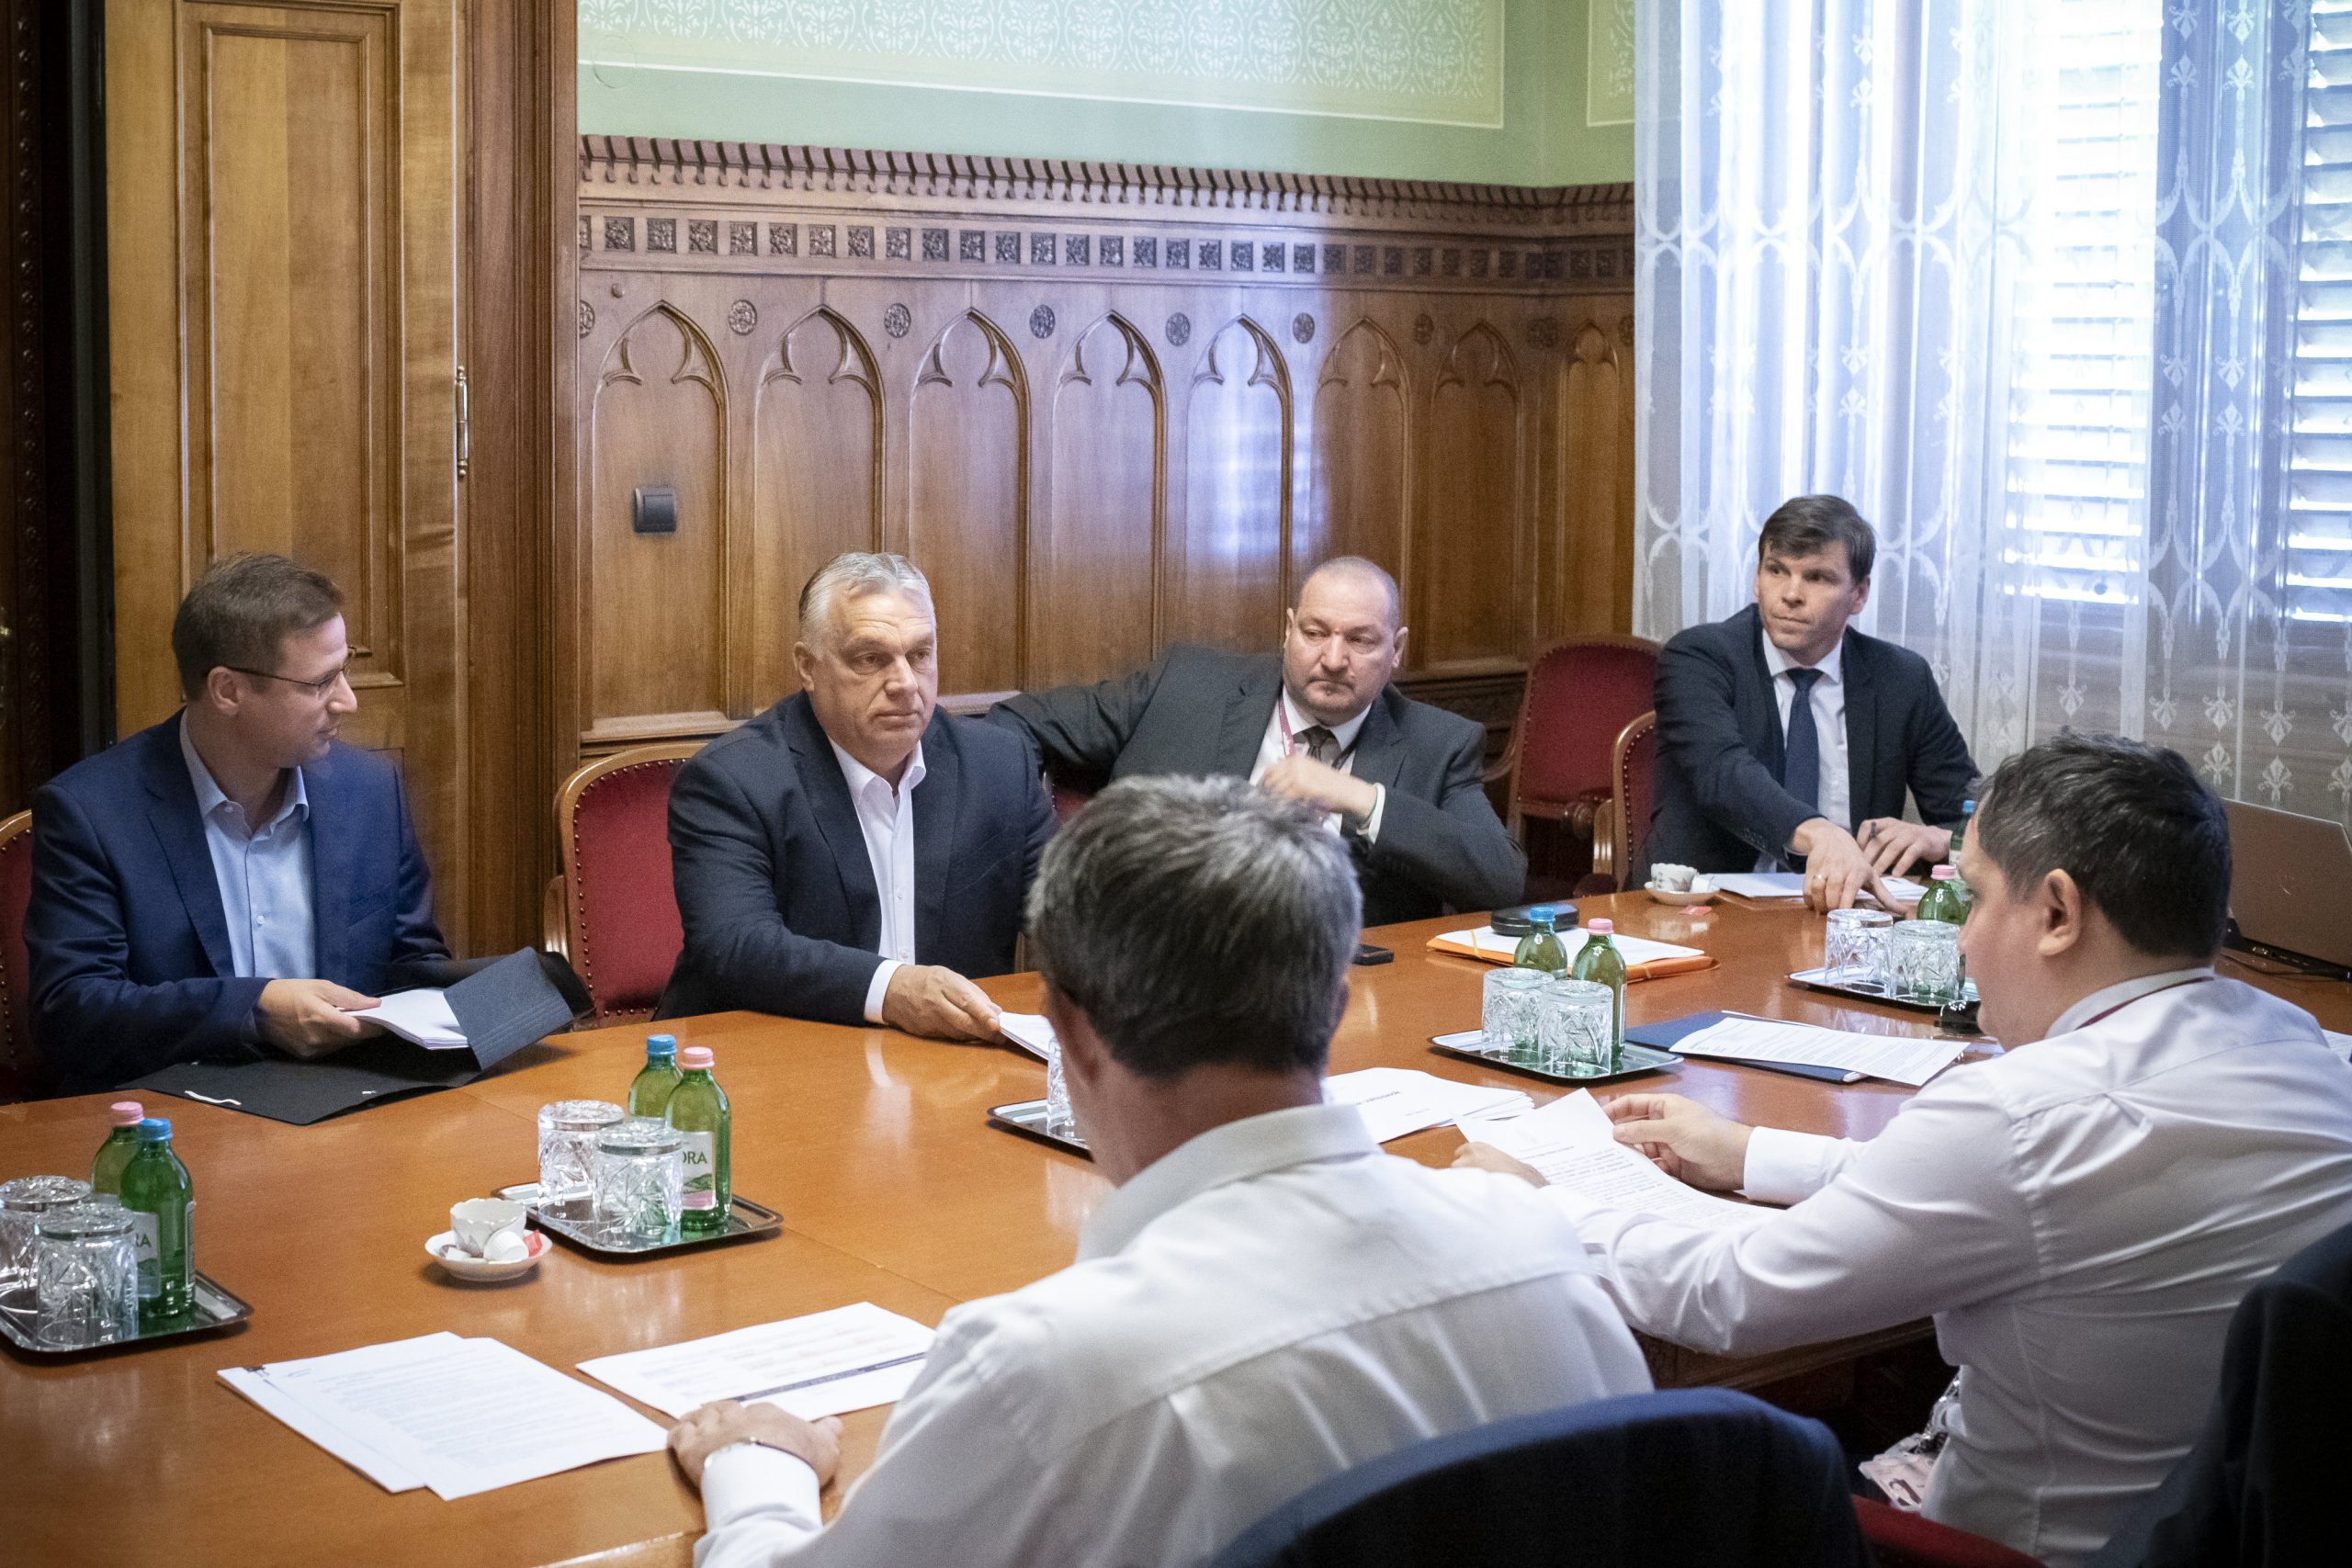 Prime Minister Orbán Calls Meeting on Energy Emergency, Utility Caps Protection